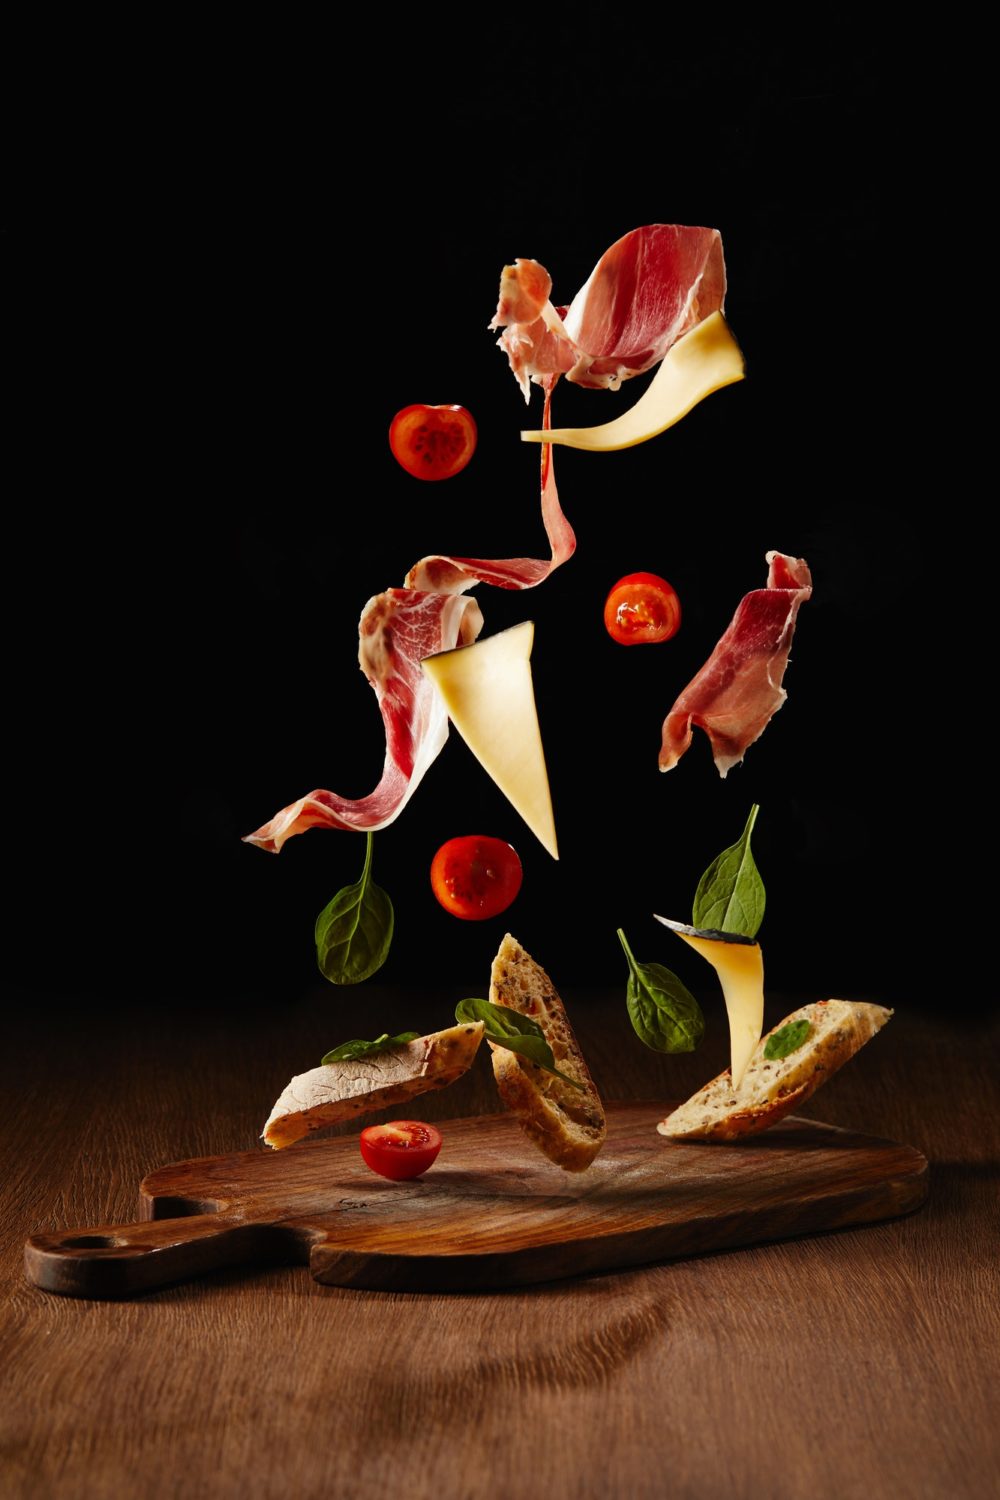 Ingredients for snack with bread, jamon and vegetables flying above wooden table surface